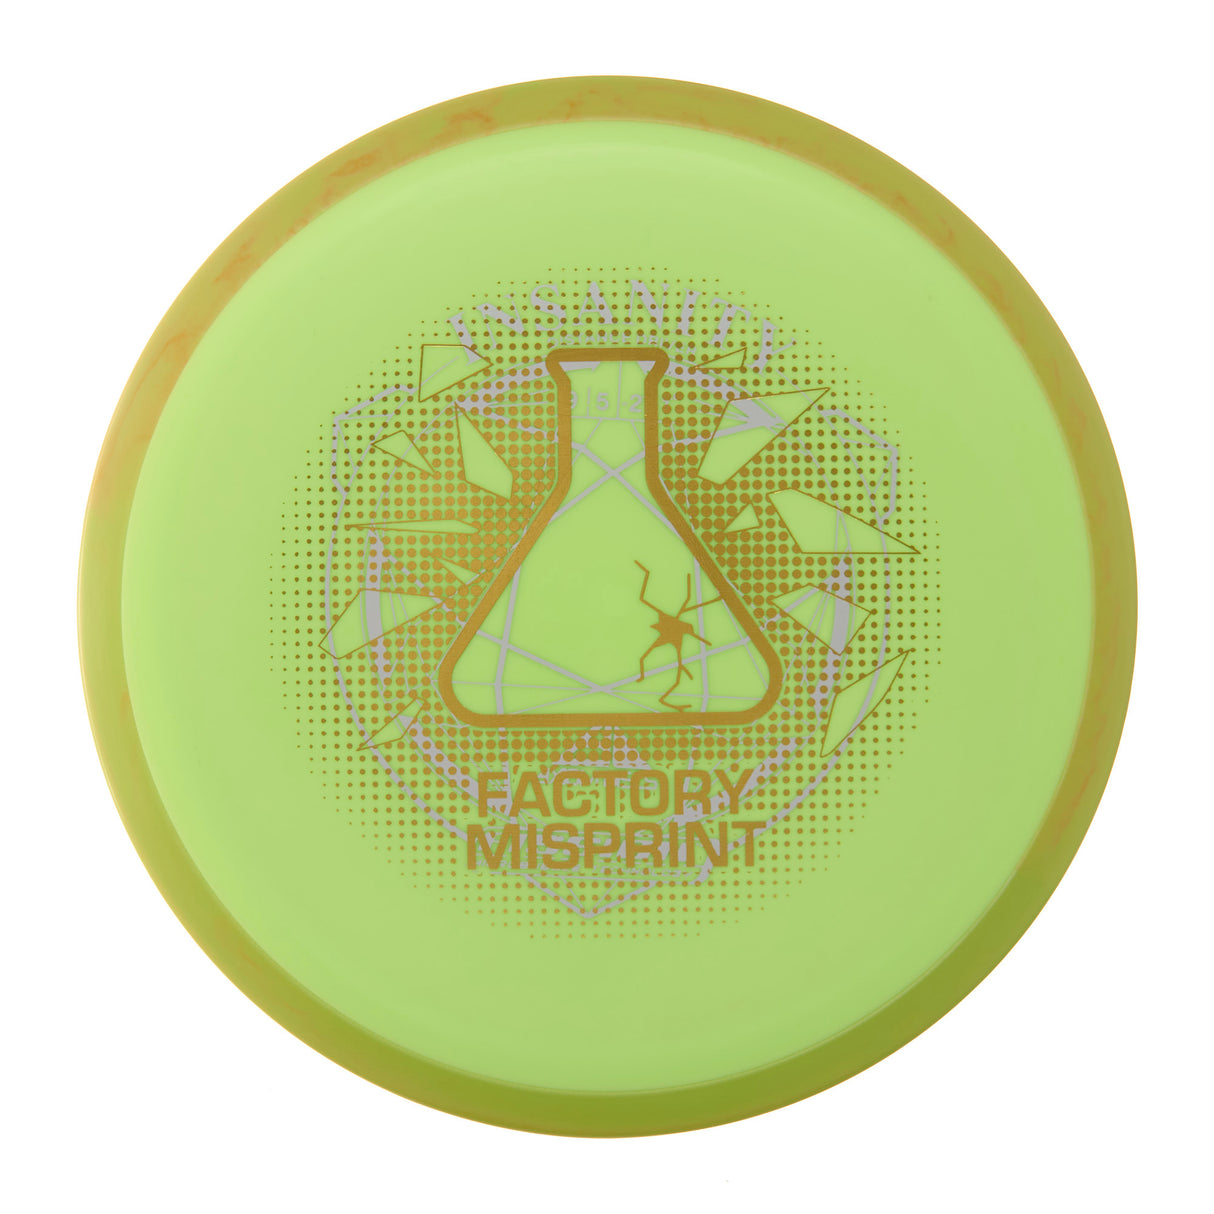 Axiom Insanity - Factory Misprint Fission 169g | Style 0003